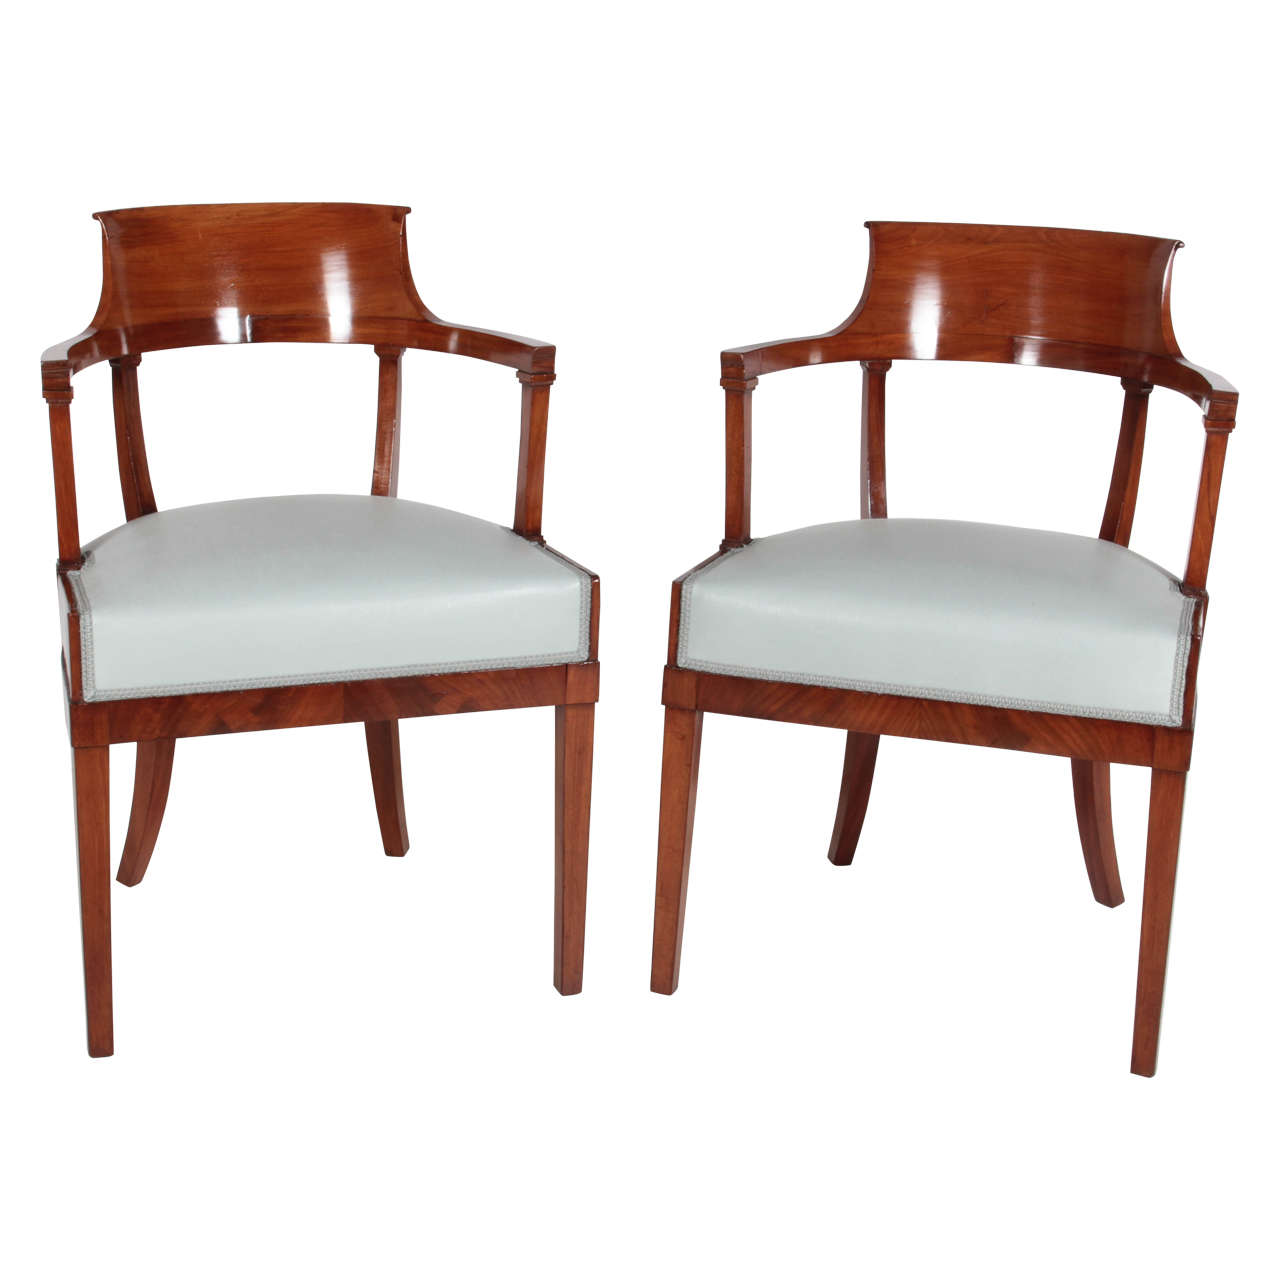 A pair of Alfred Grenander Armchairs